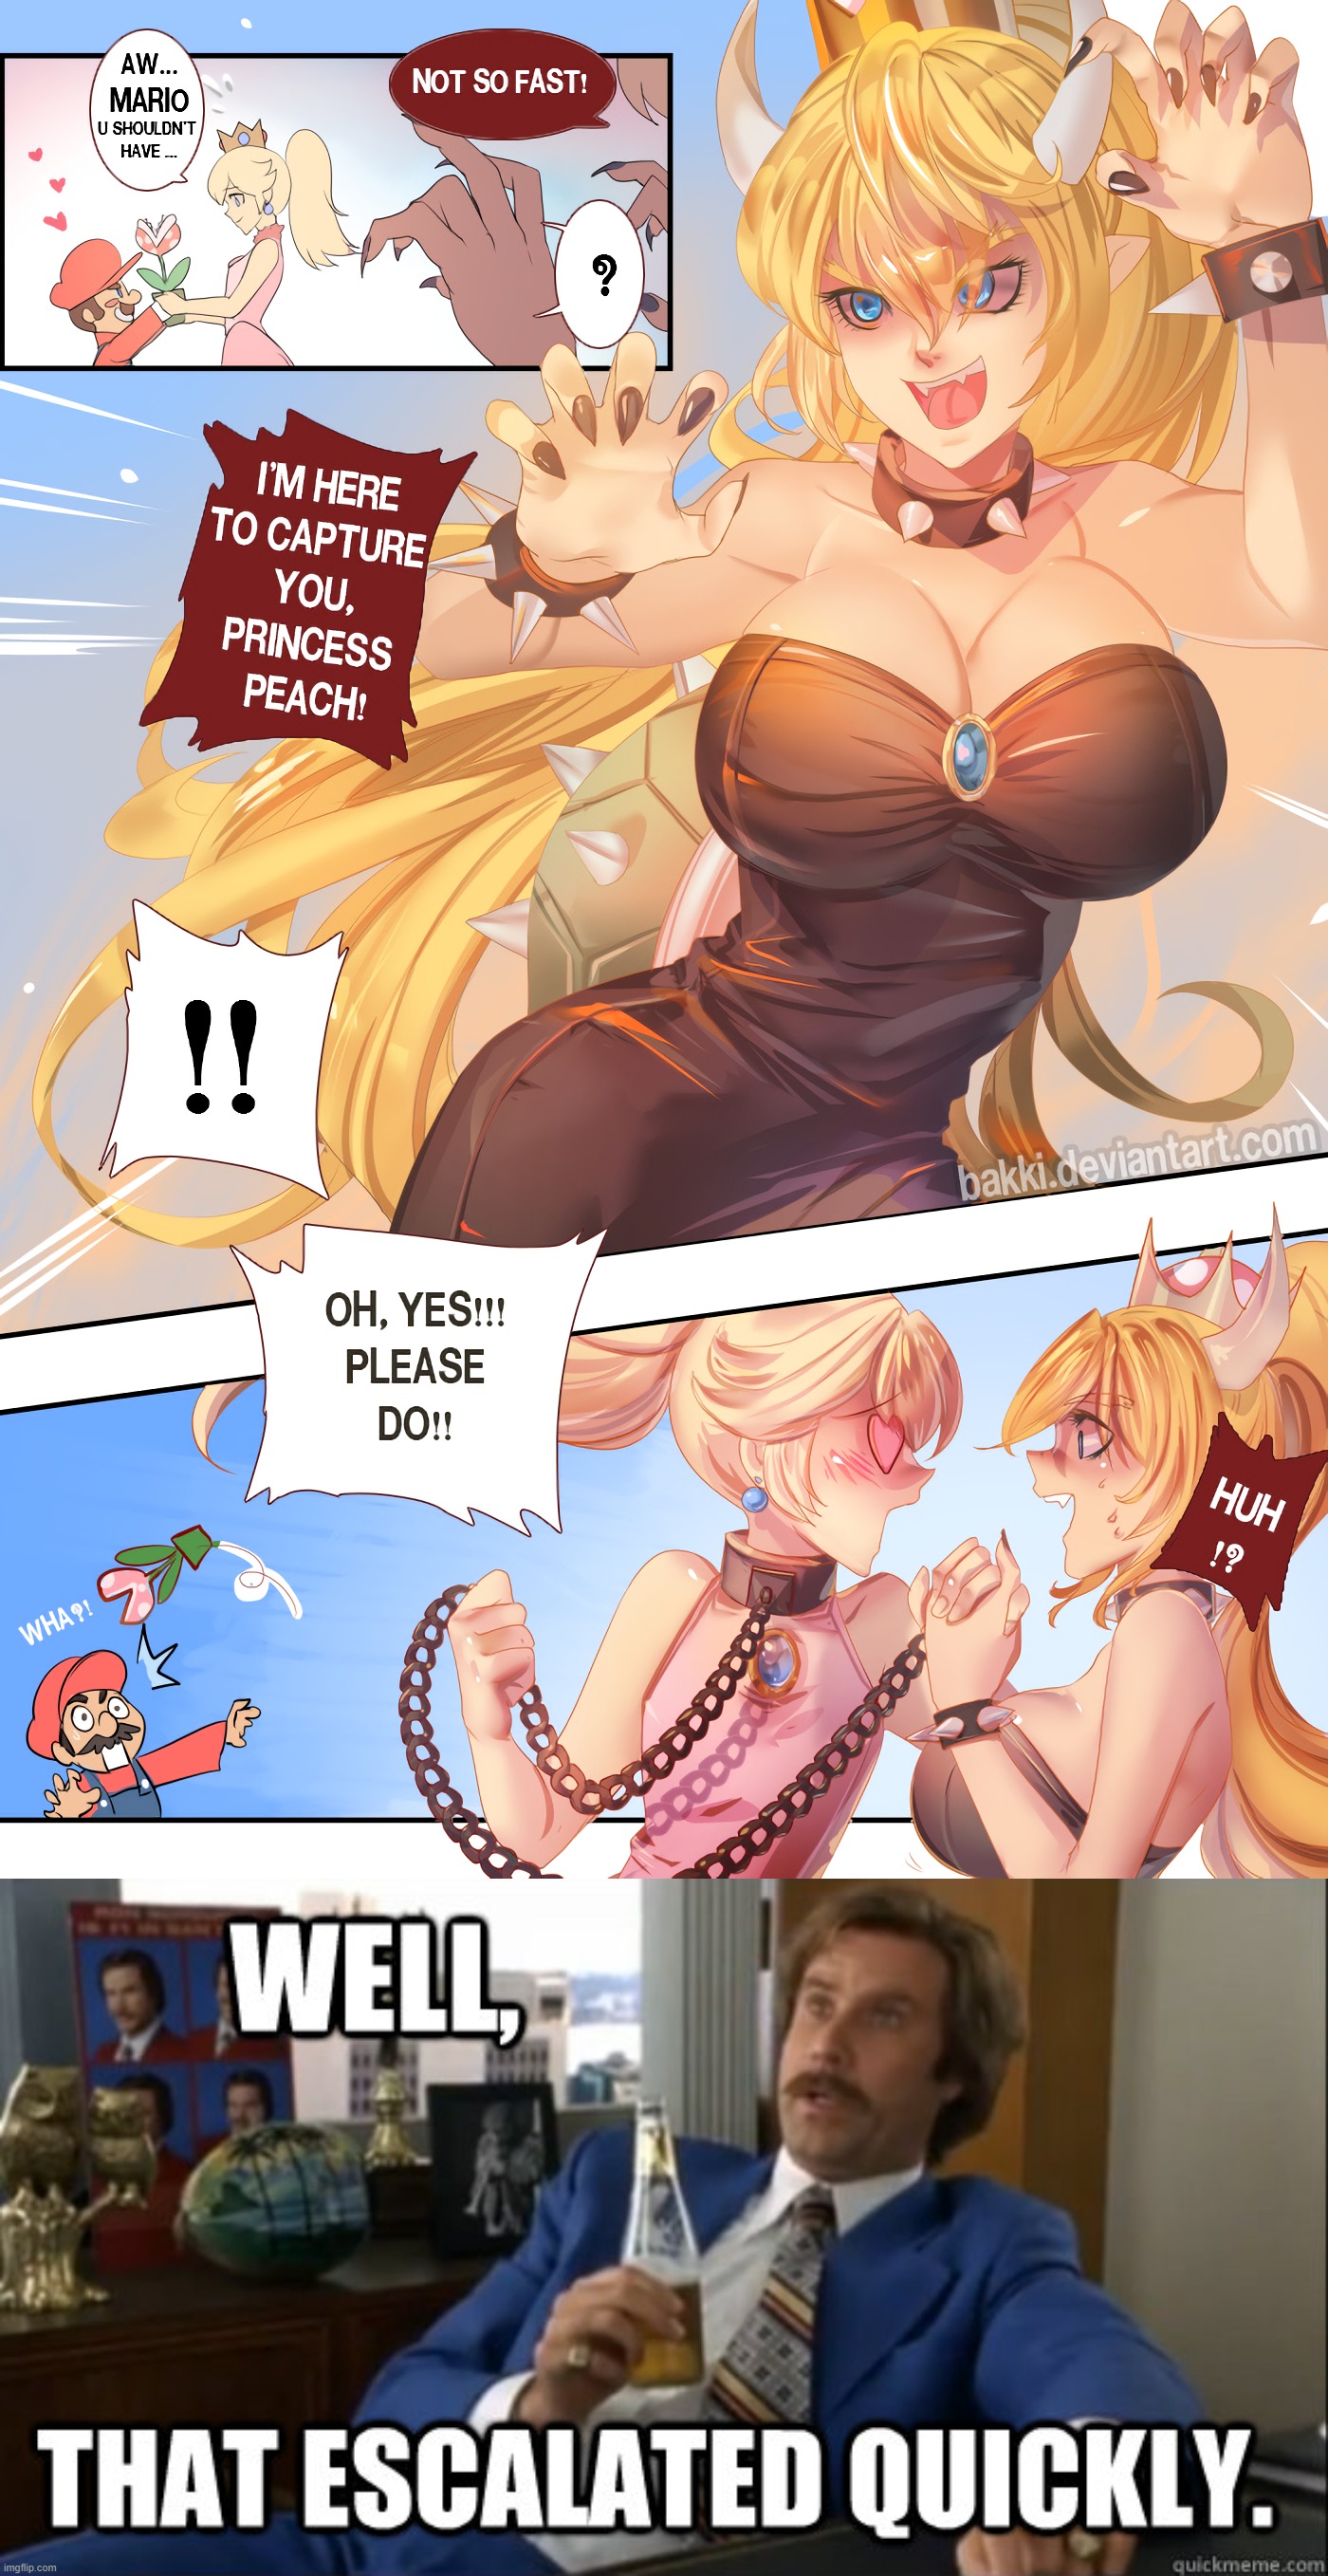 Well damn. xD | image tagged in memes,funny,mario,peach,bowsette,comics/cartoons | made w/ Imgflip meme maker